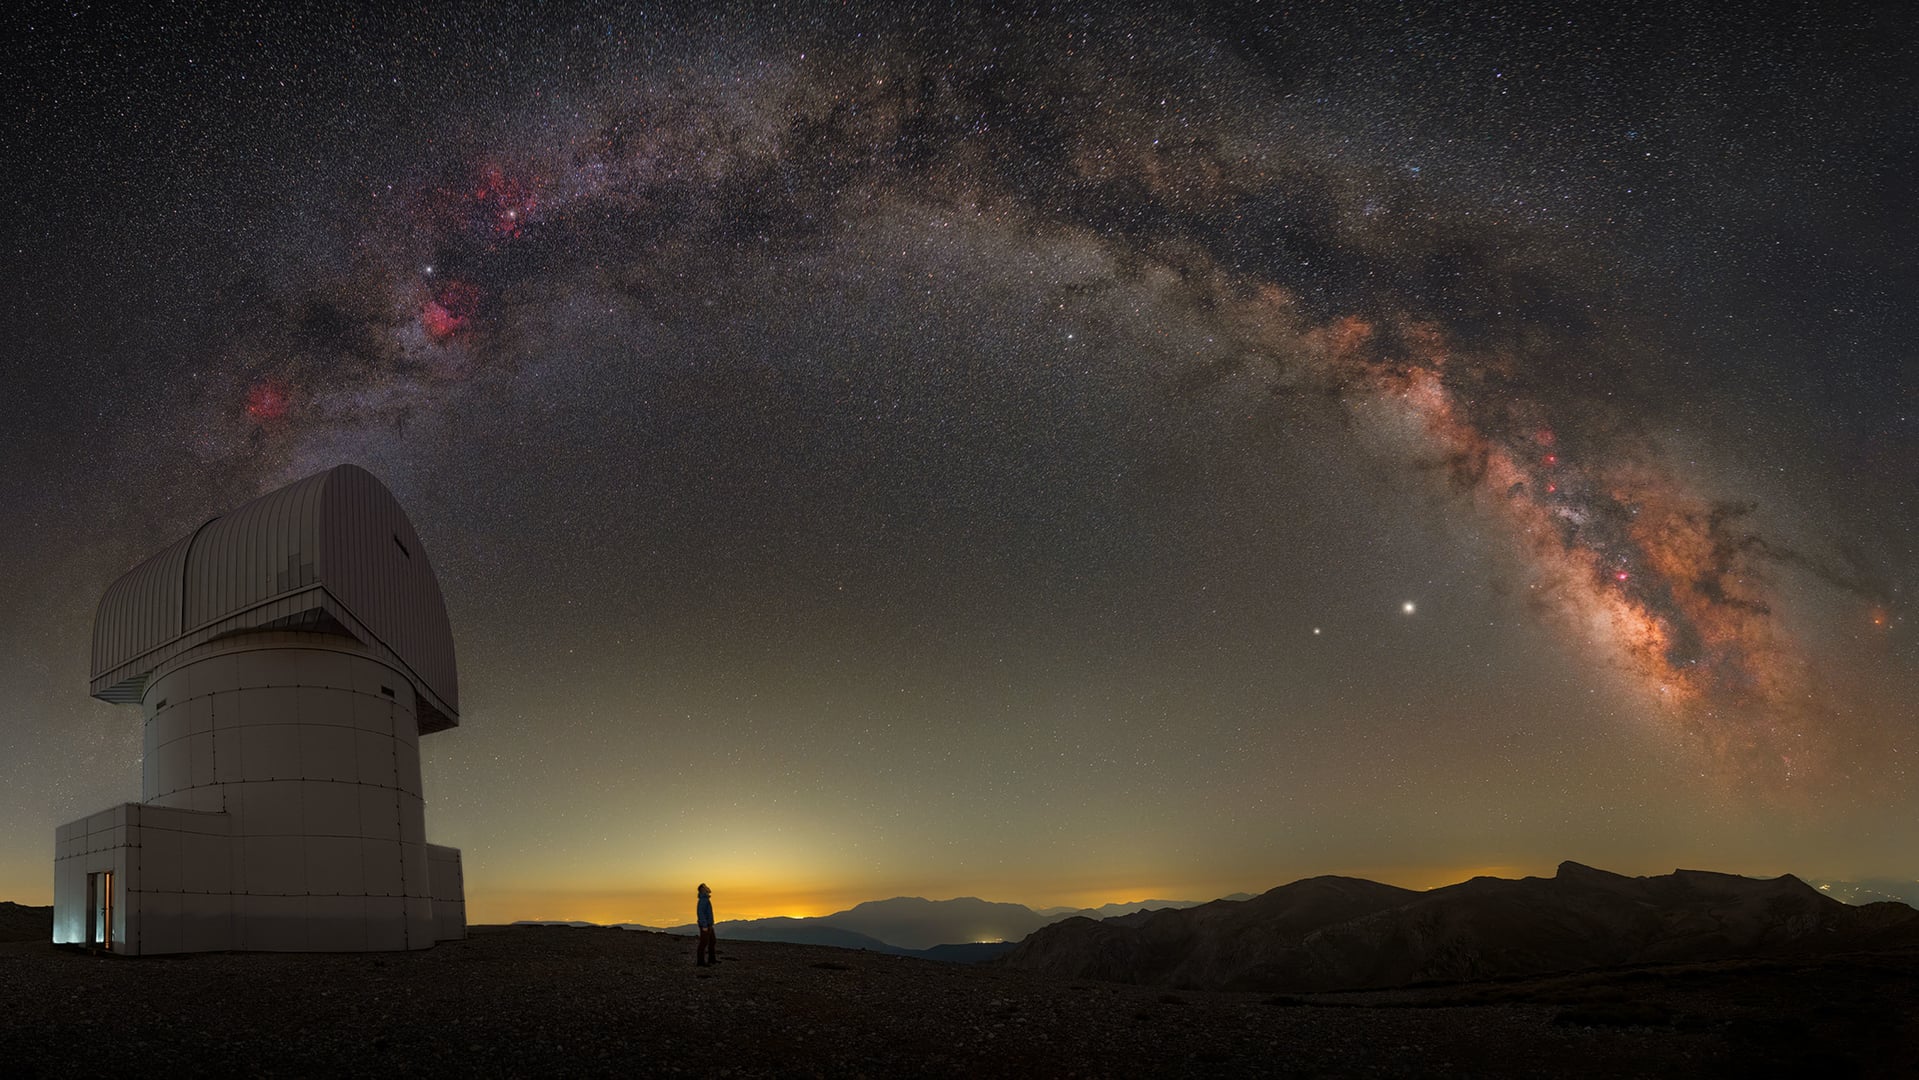 Milky Way photographer of the Year